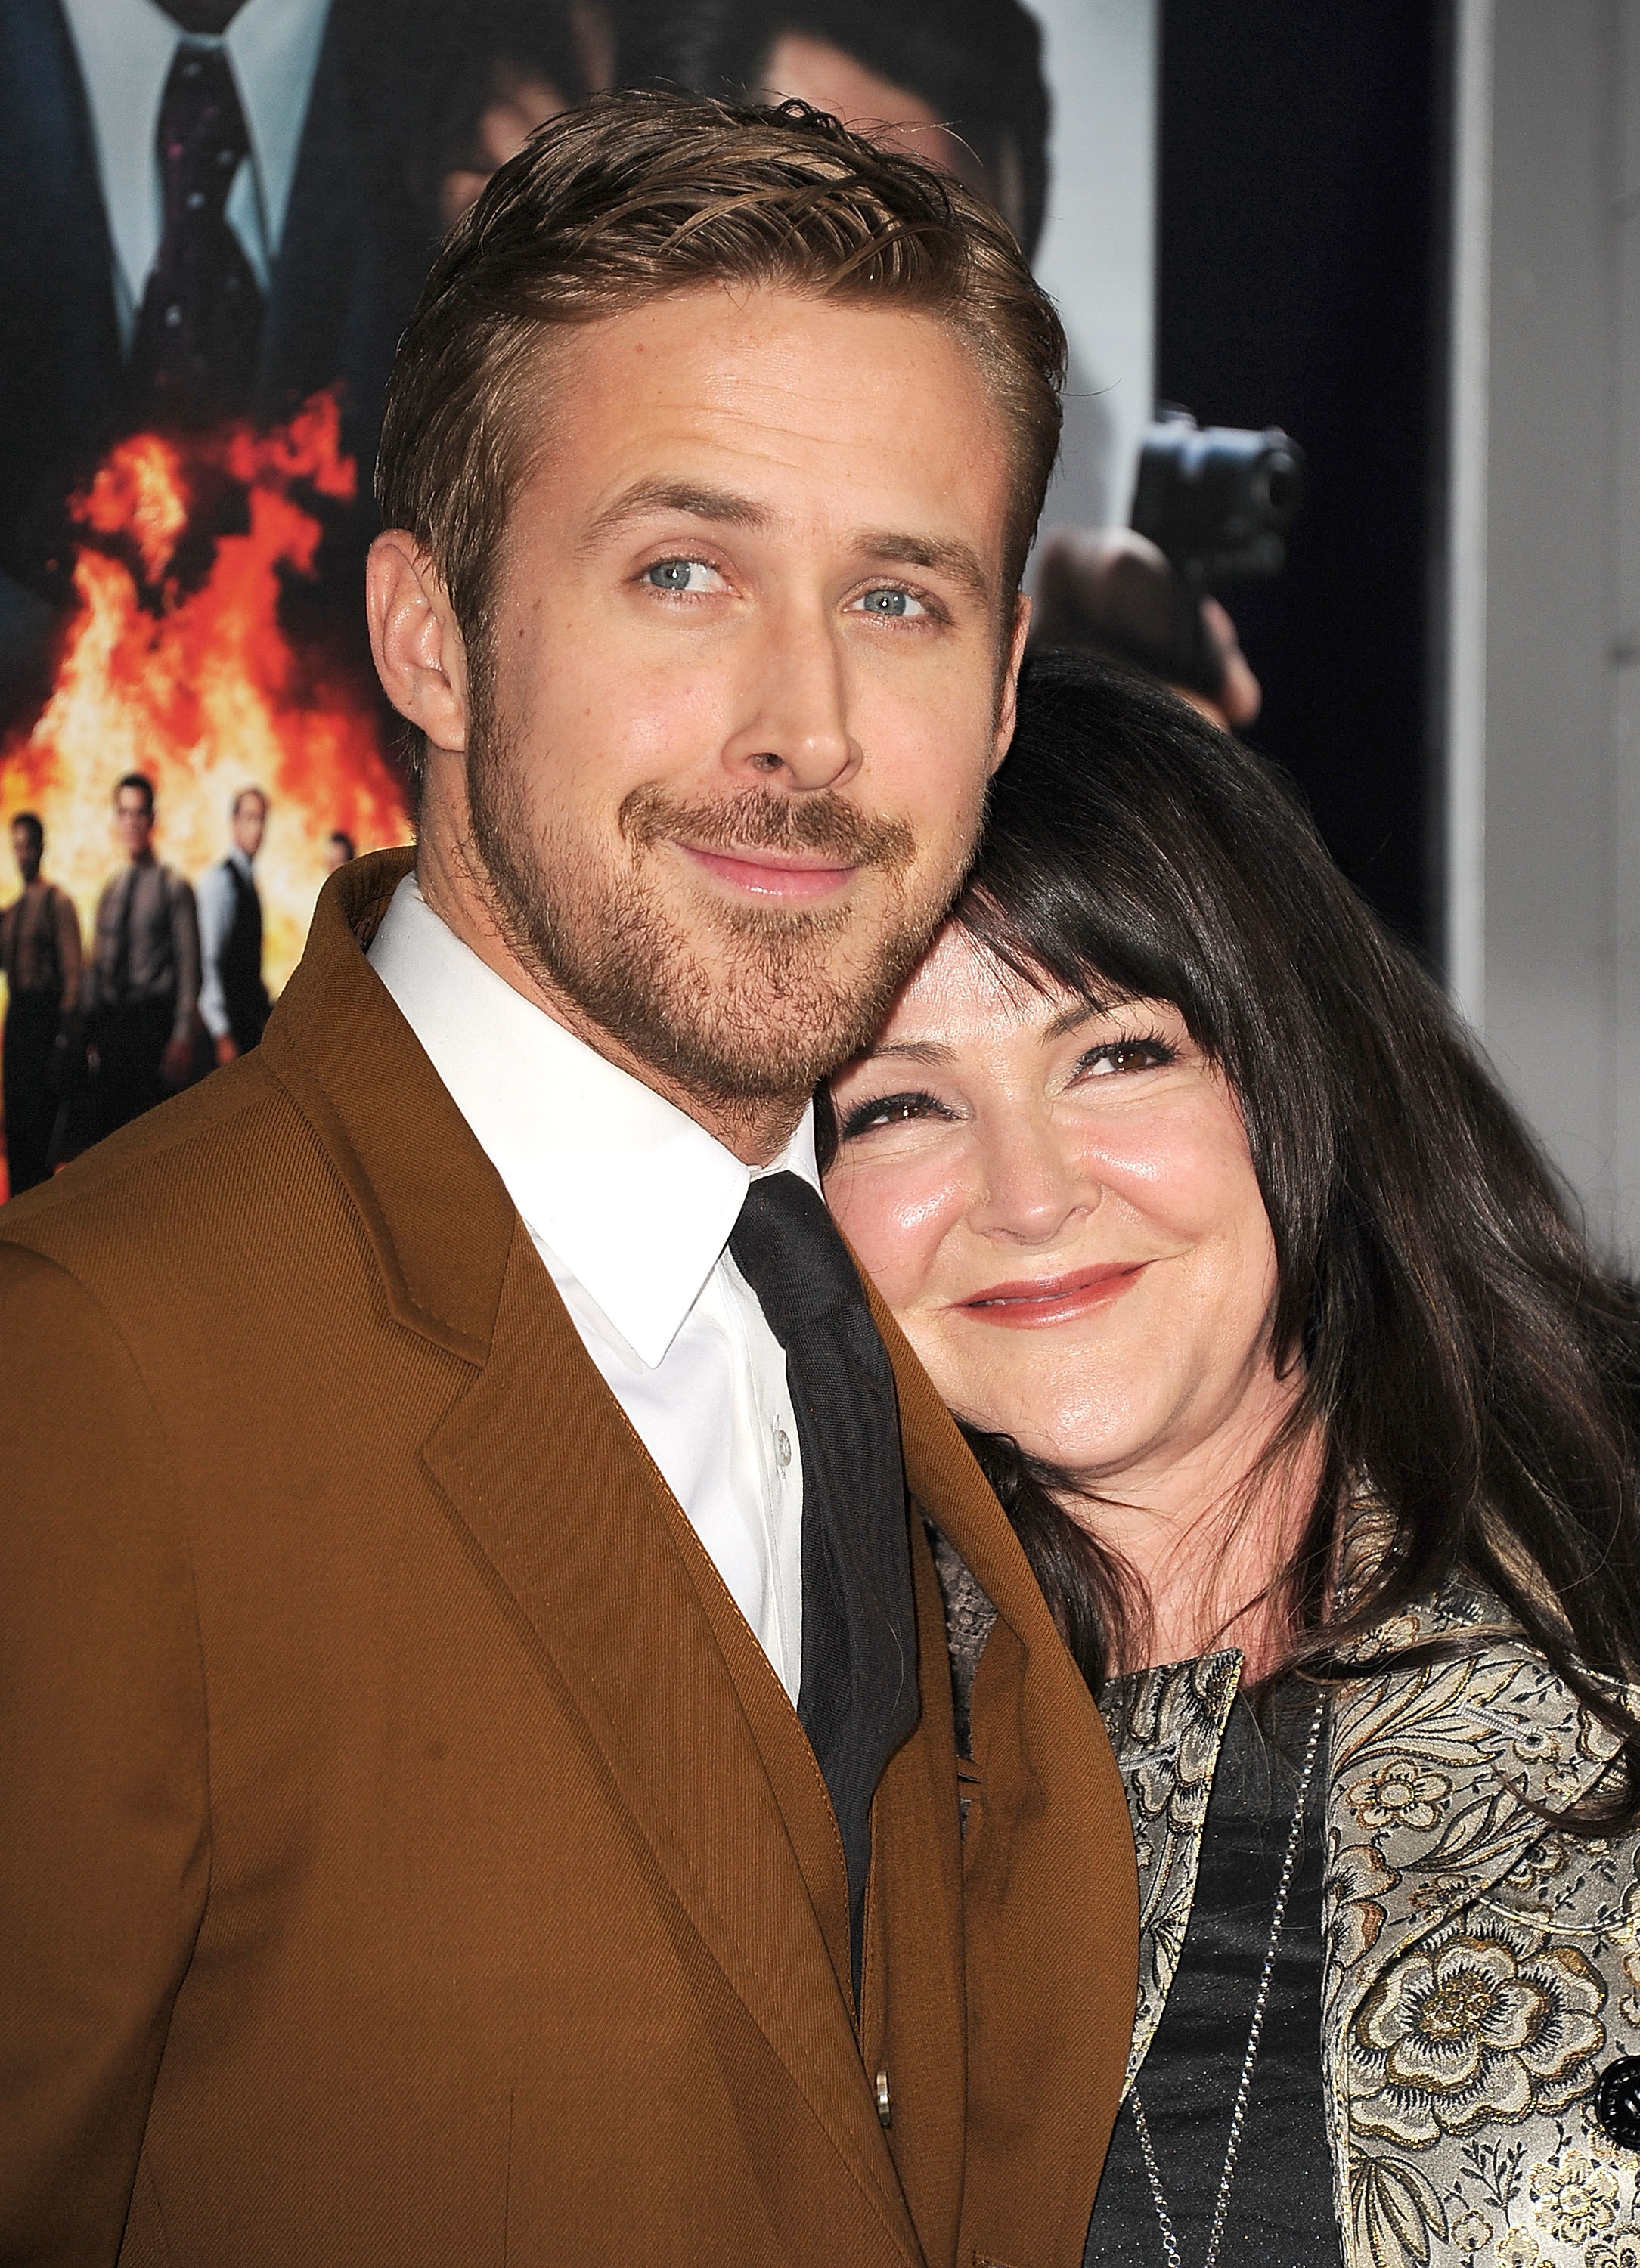 Ryan Gosling and his mom on the red carpet